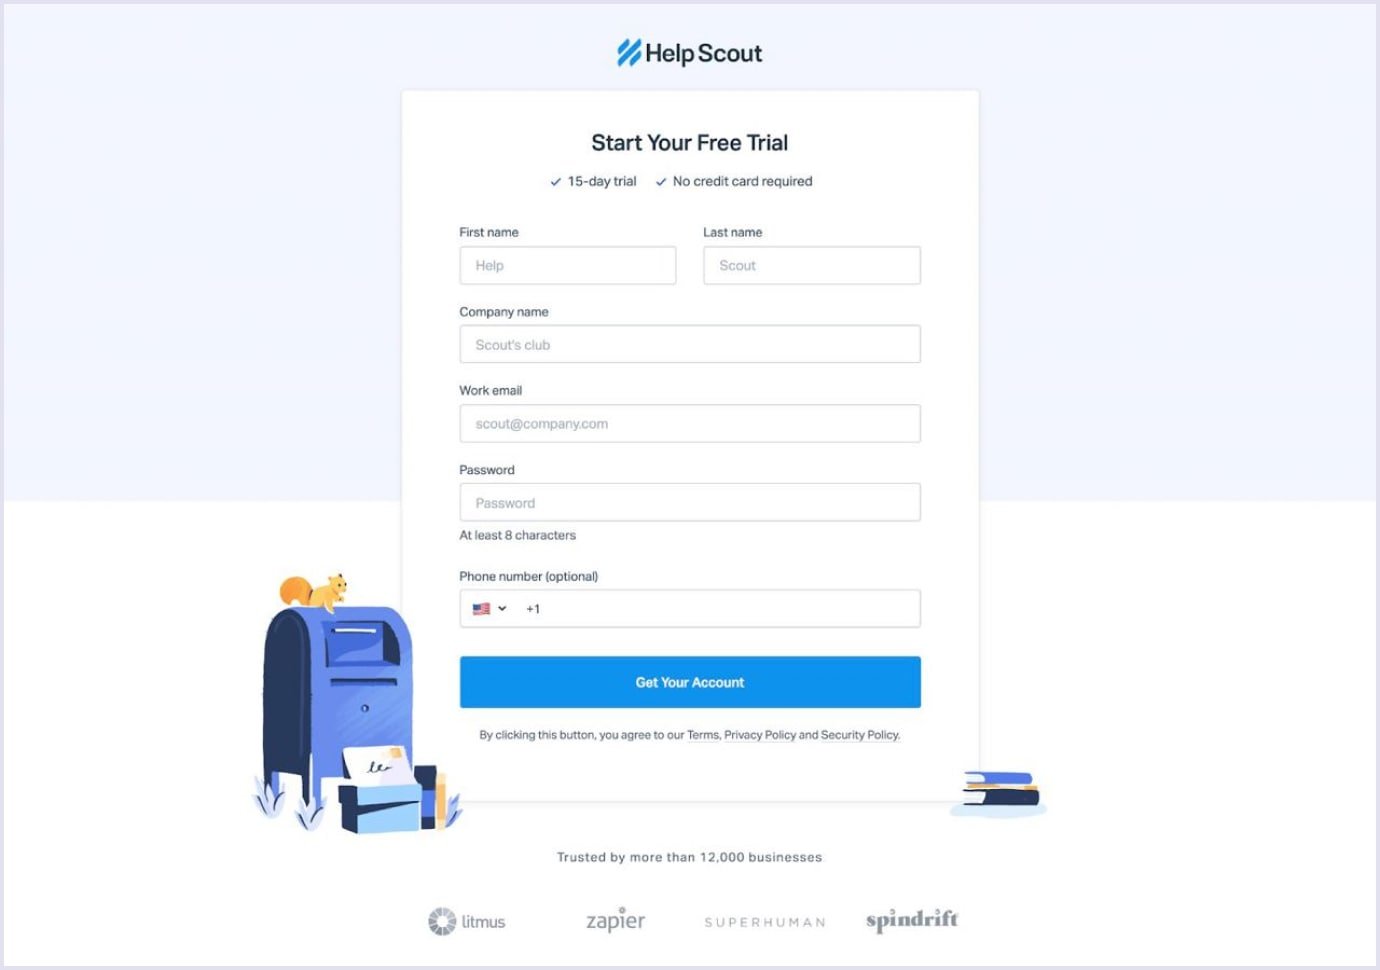 HelpScout's sign-up form